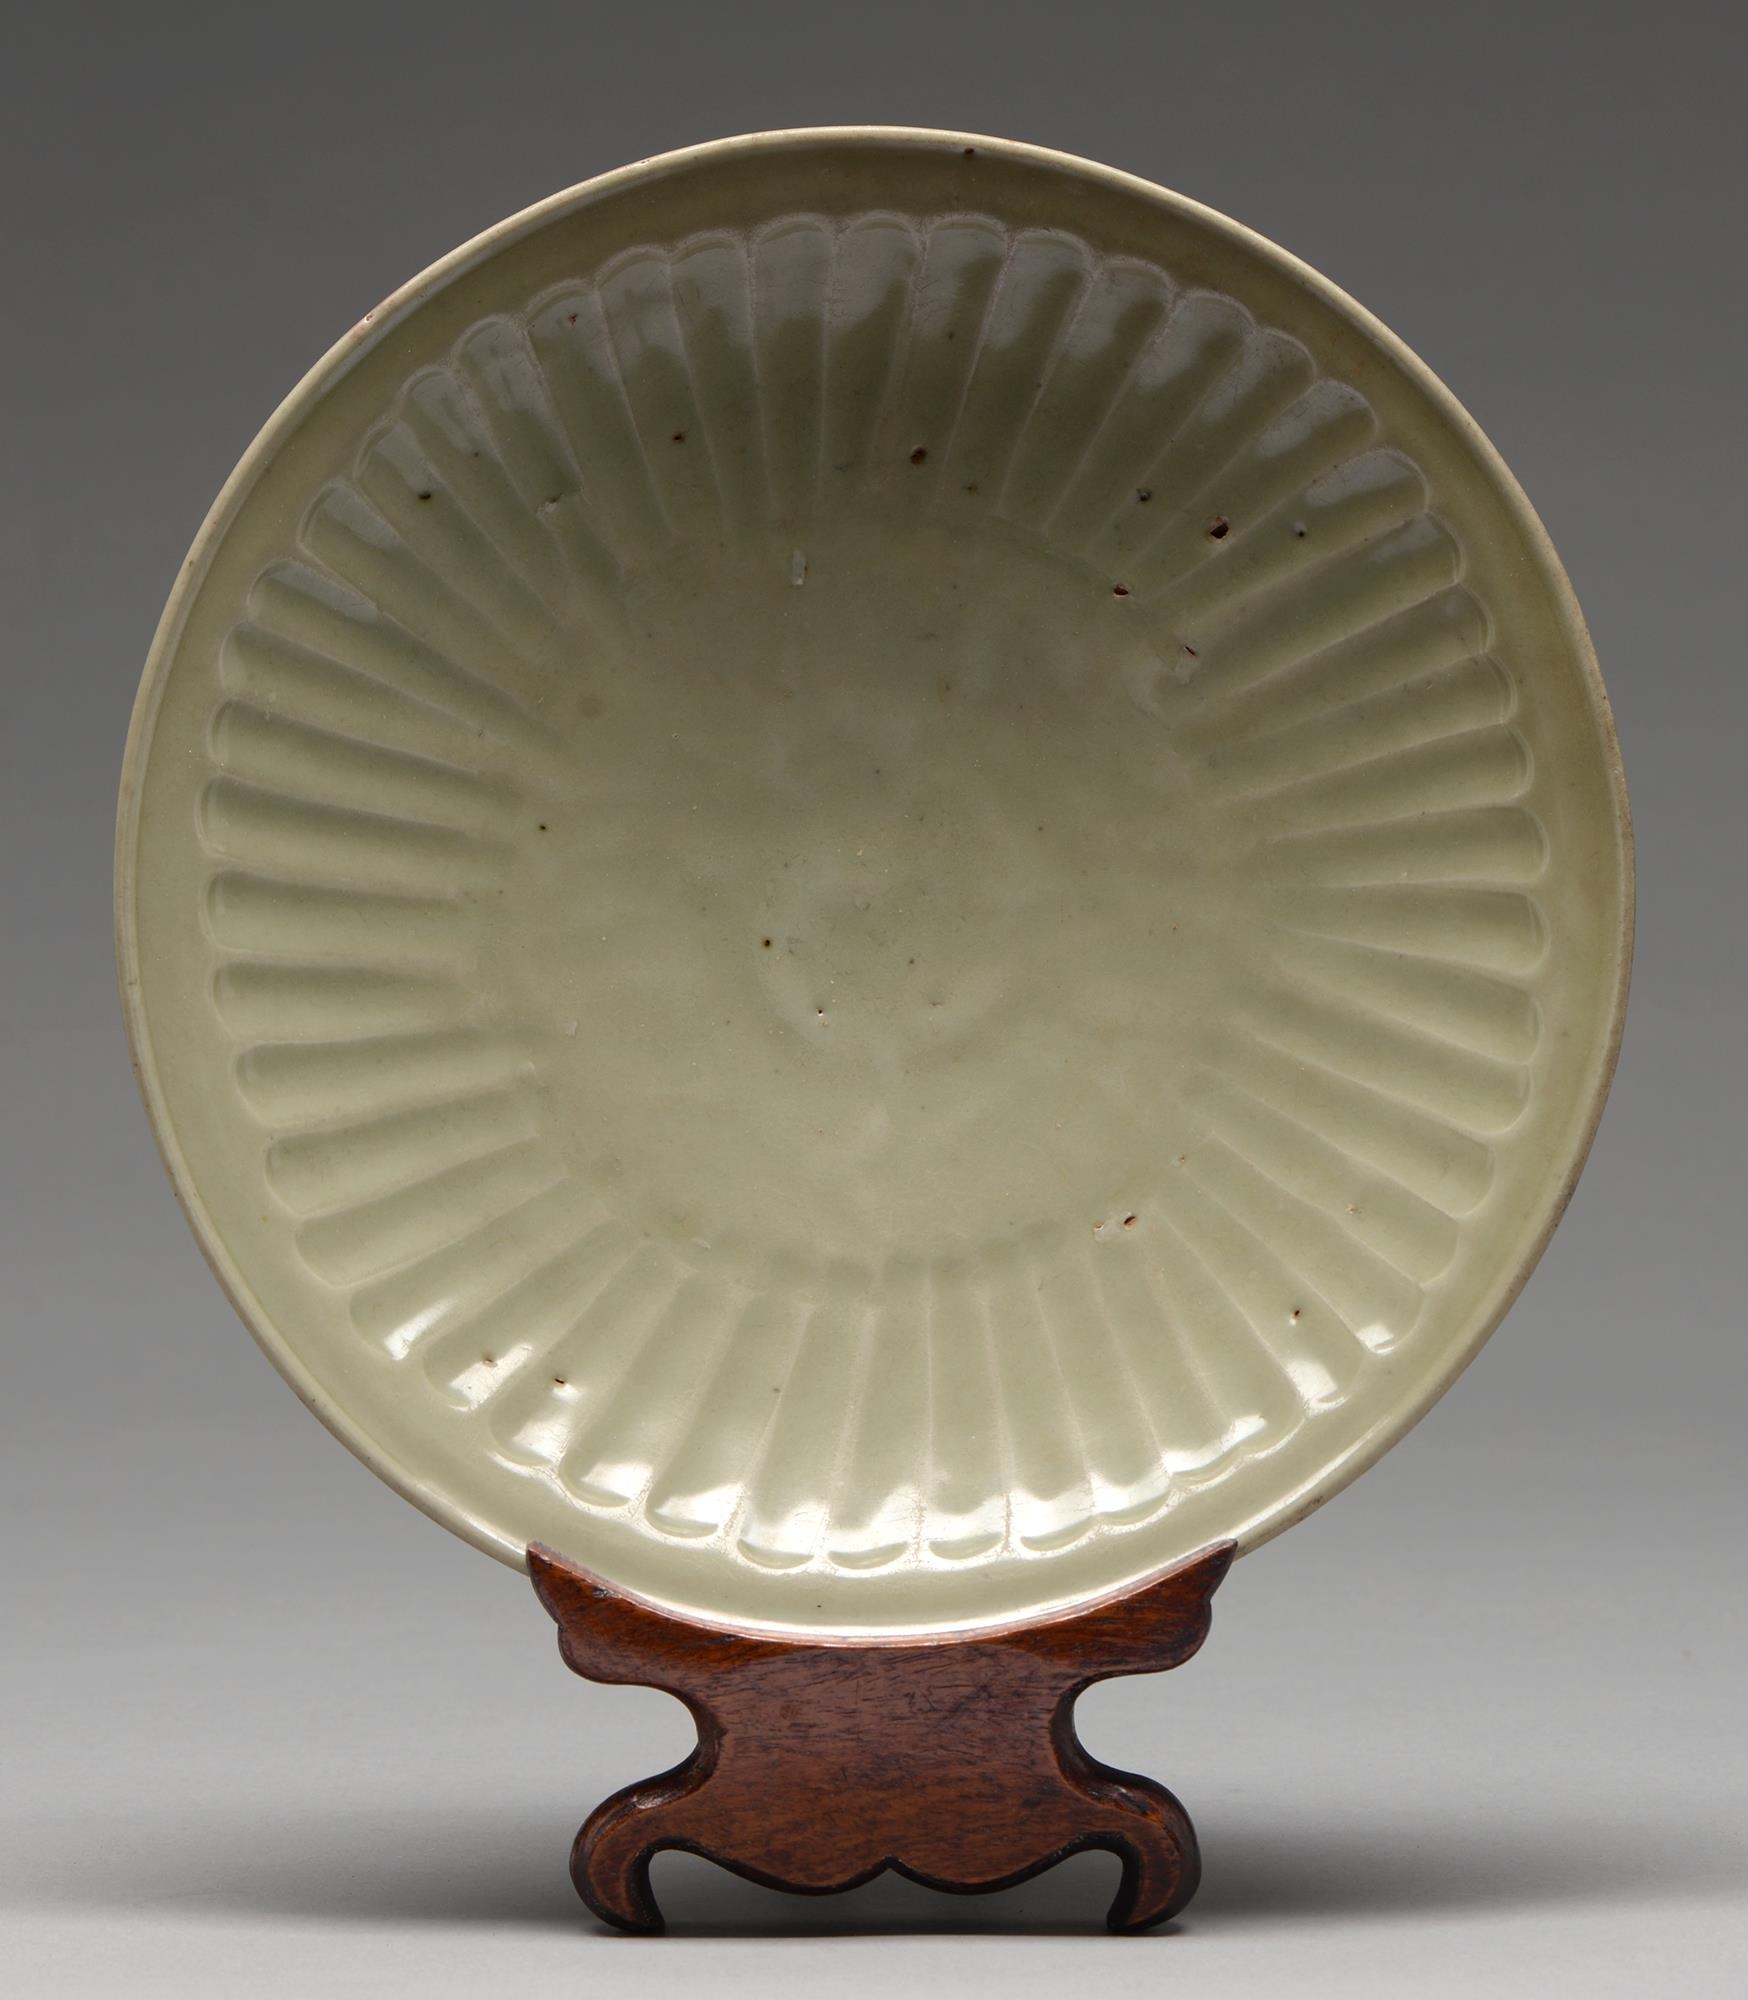 A Swatow Ware dish, Ming dynasty, of fluted form, unglazed inside the foot ring, 28cm diam